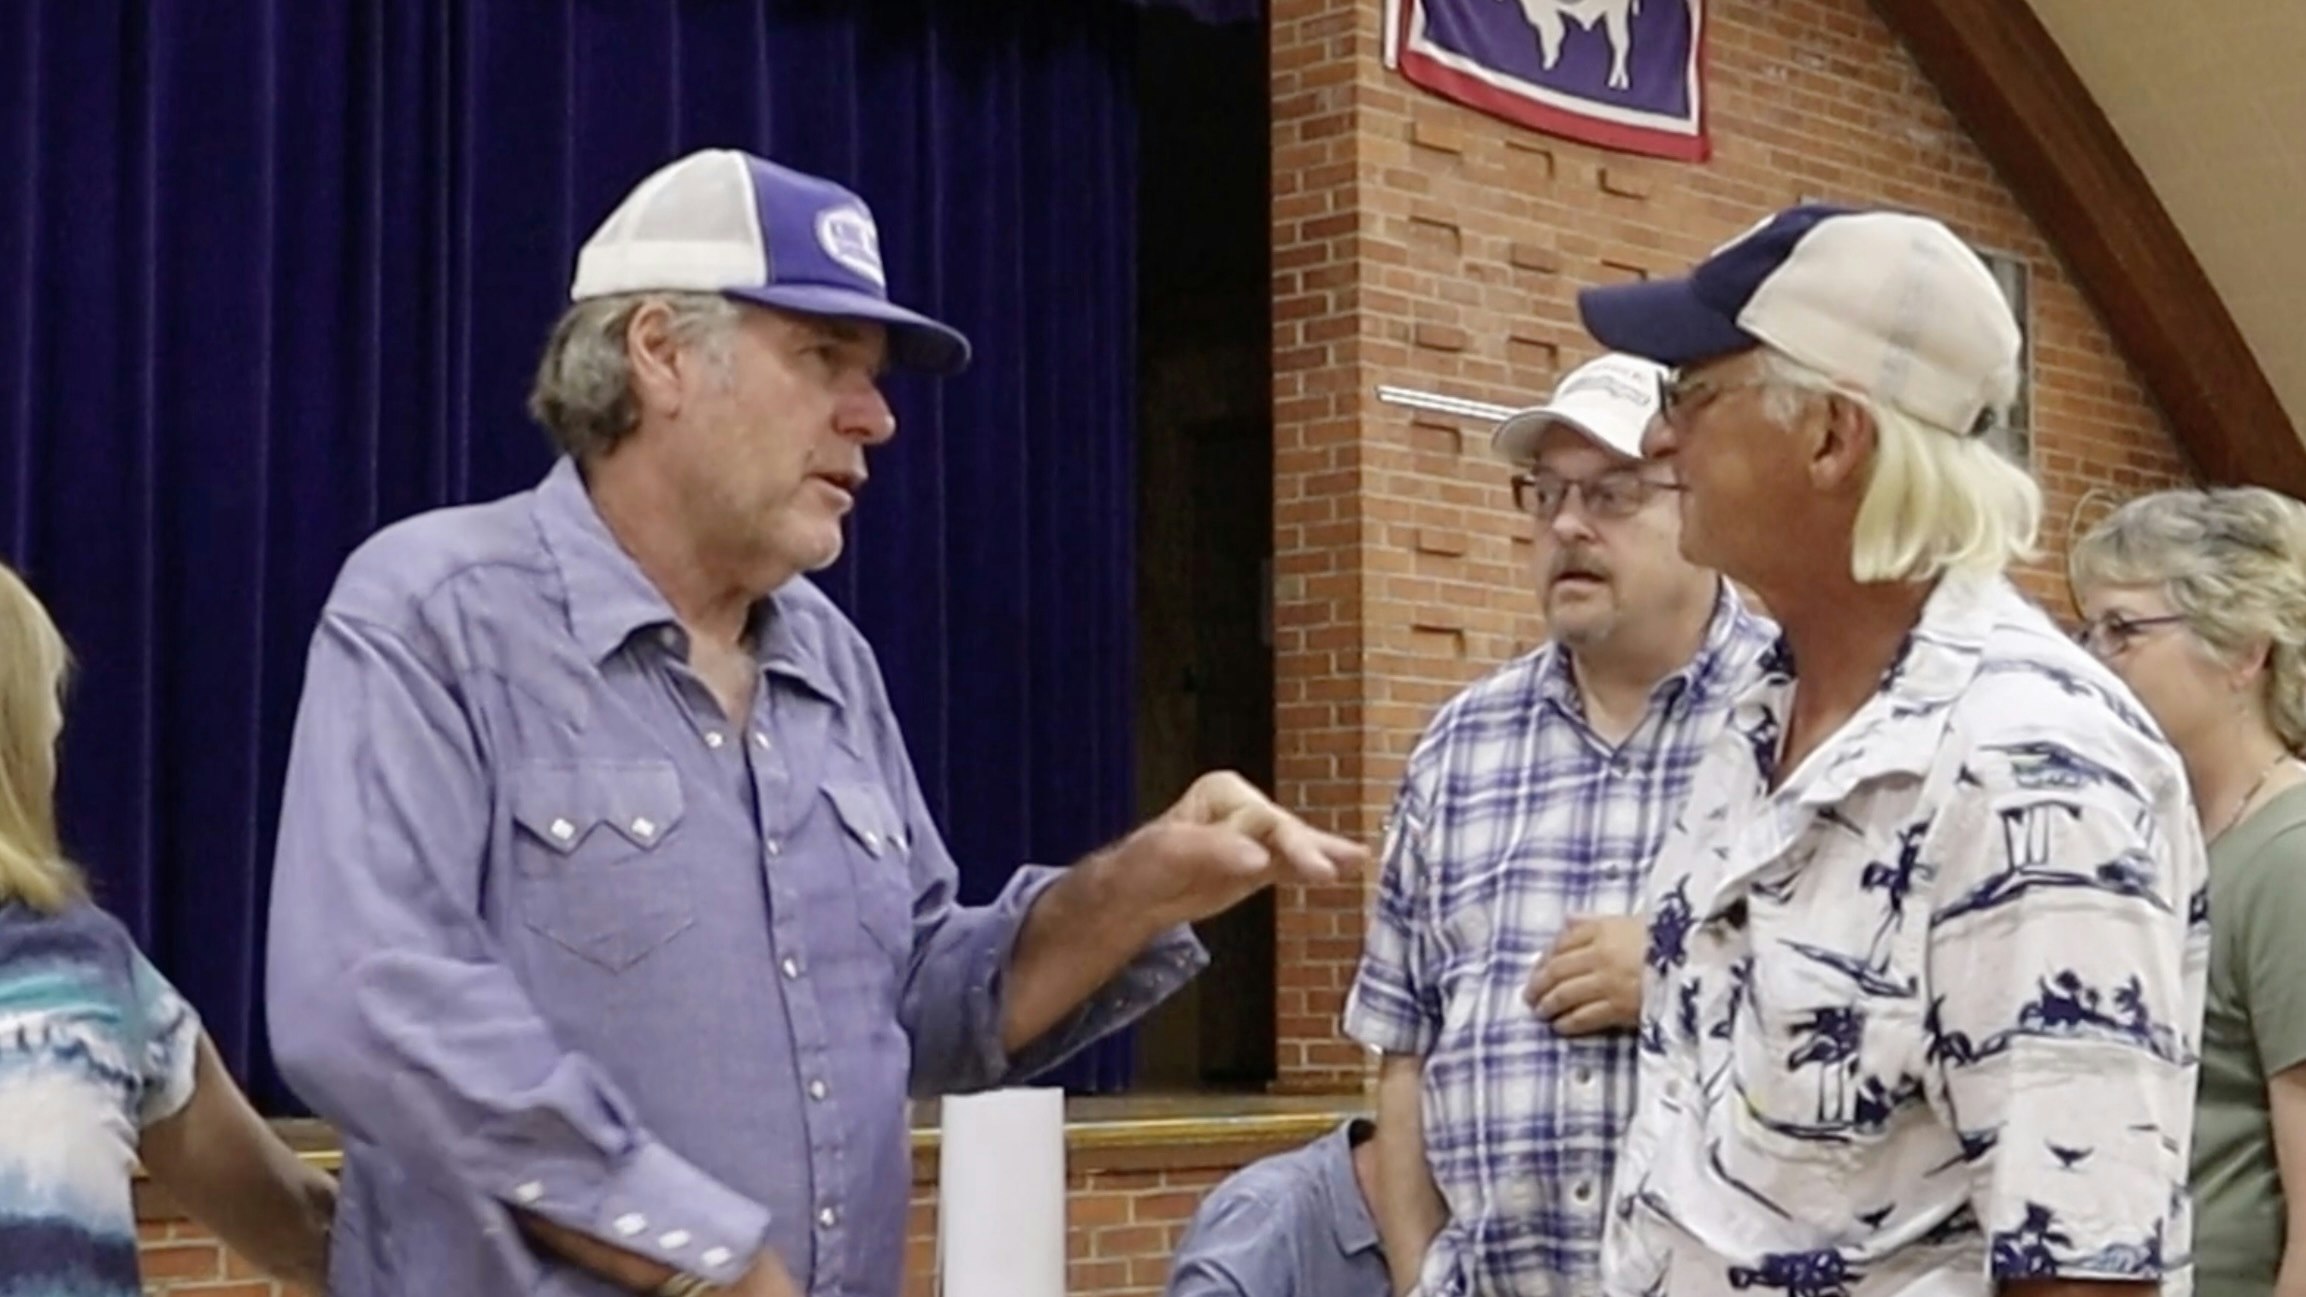 Show star Robert Taylor, aka Walt Longmire, chats with fans at an autograph session in 2022.